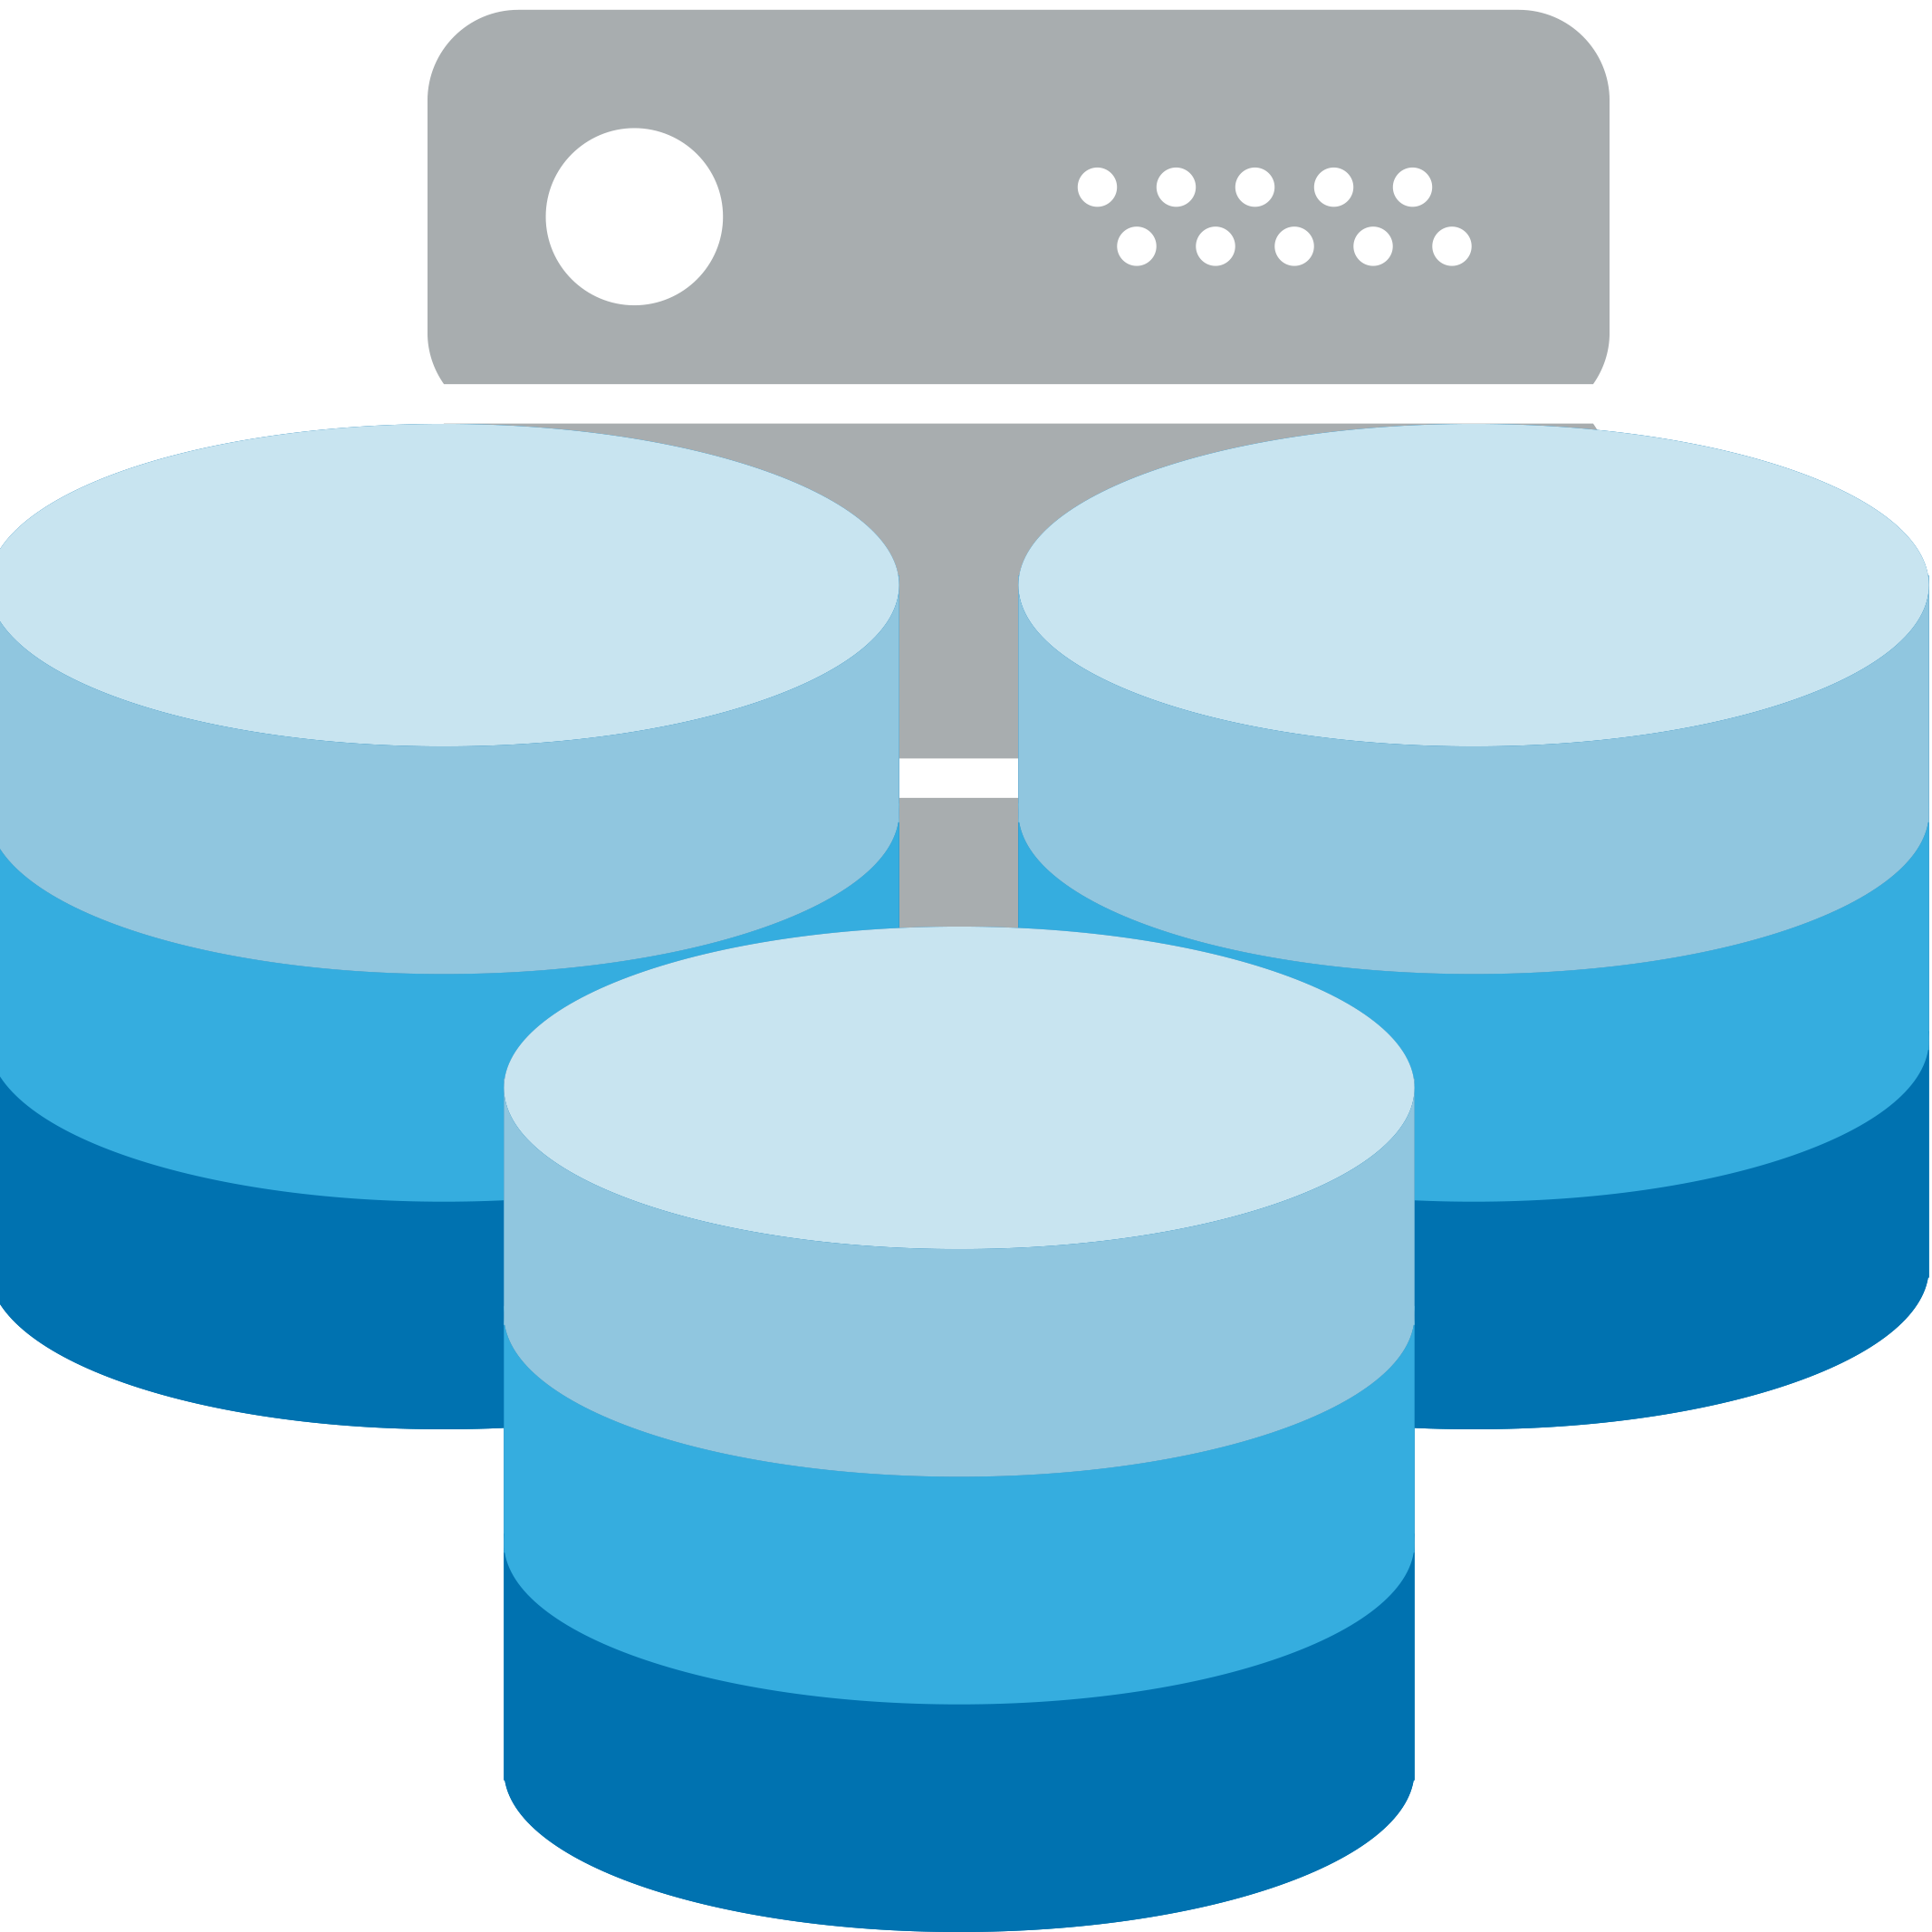 hosted database infrastructure